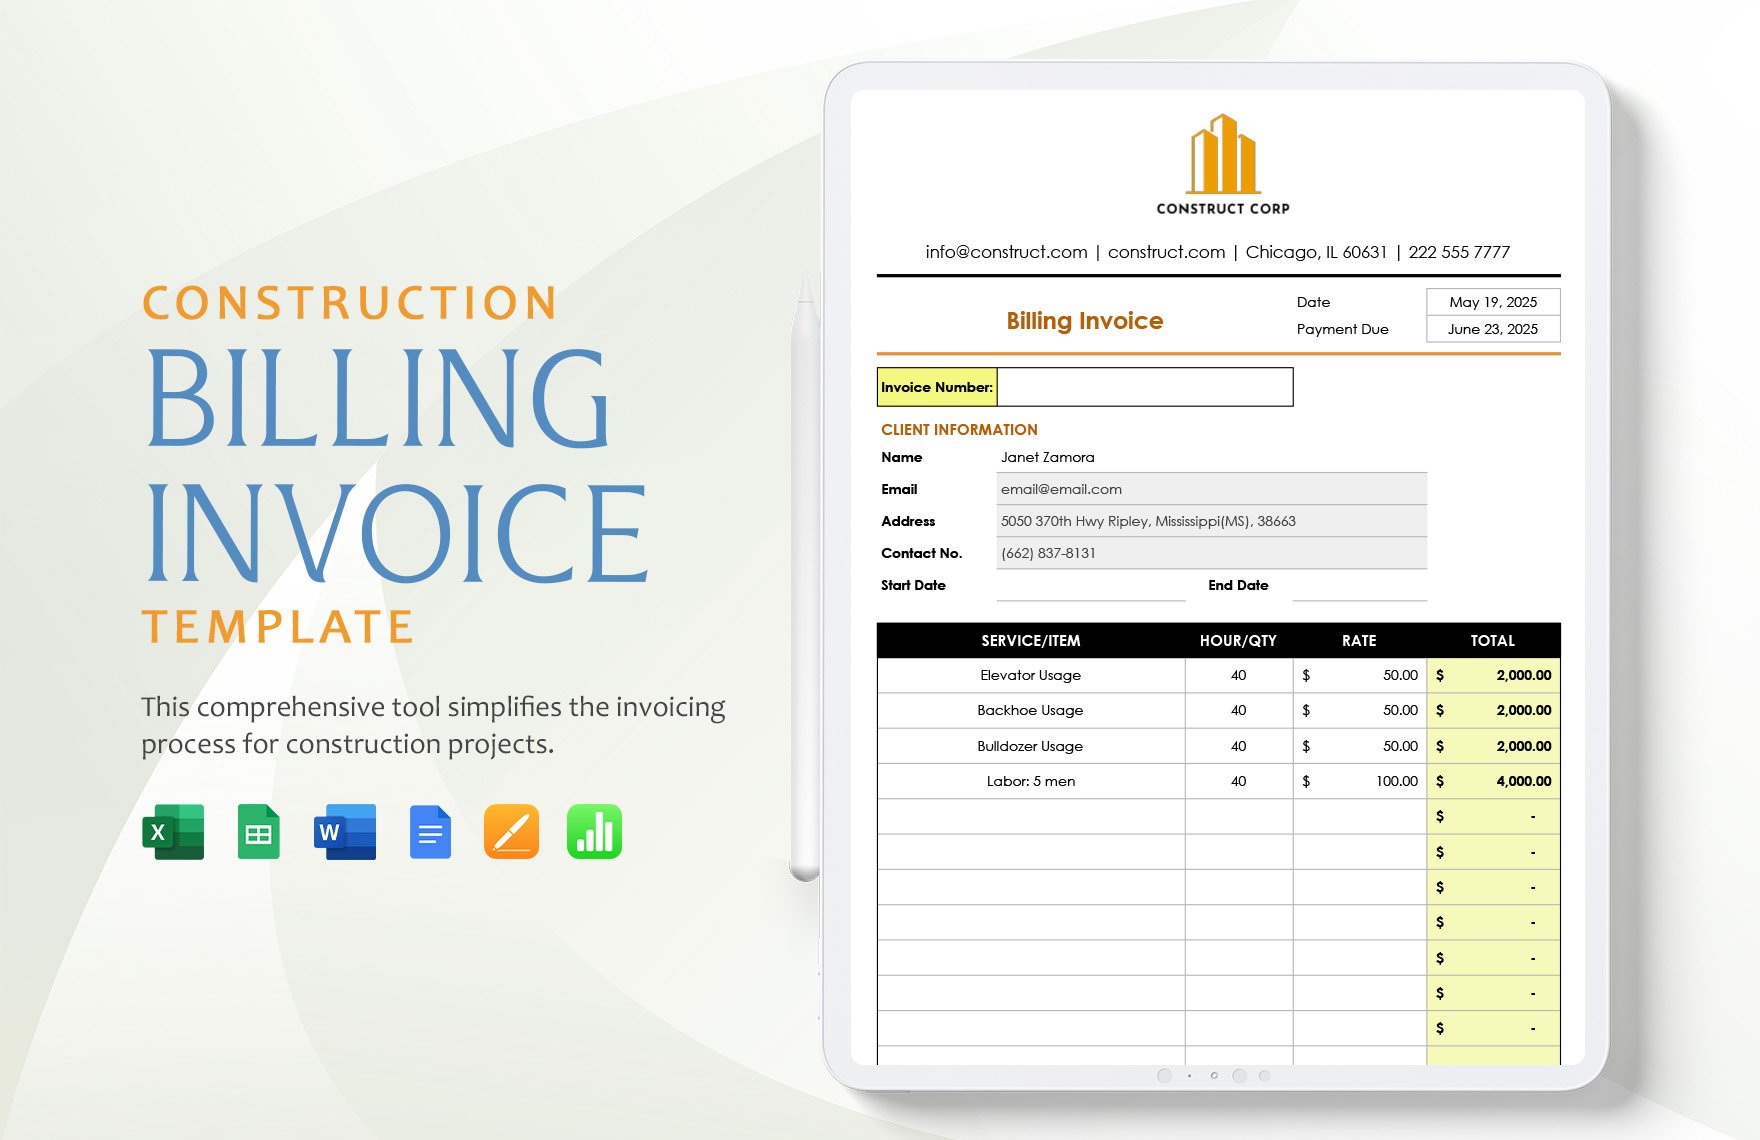 Construction Billing Invoice Template in Word, Google Docs, Excel, Google Sheets, Apple Pages, Apple Numbers